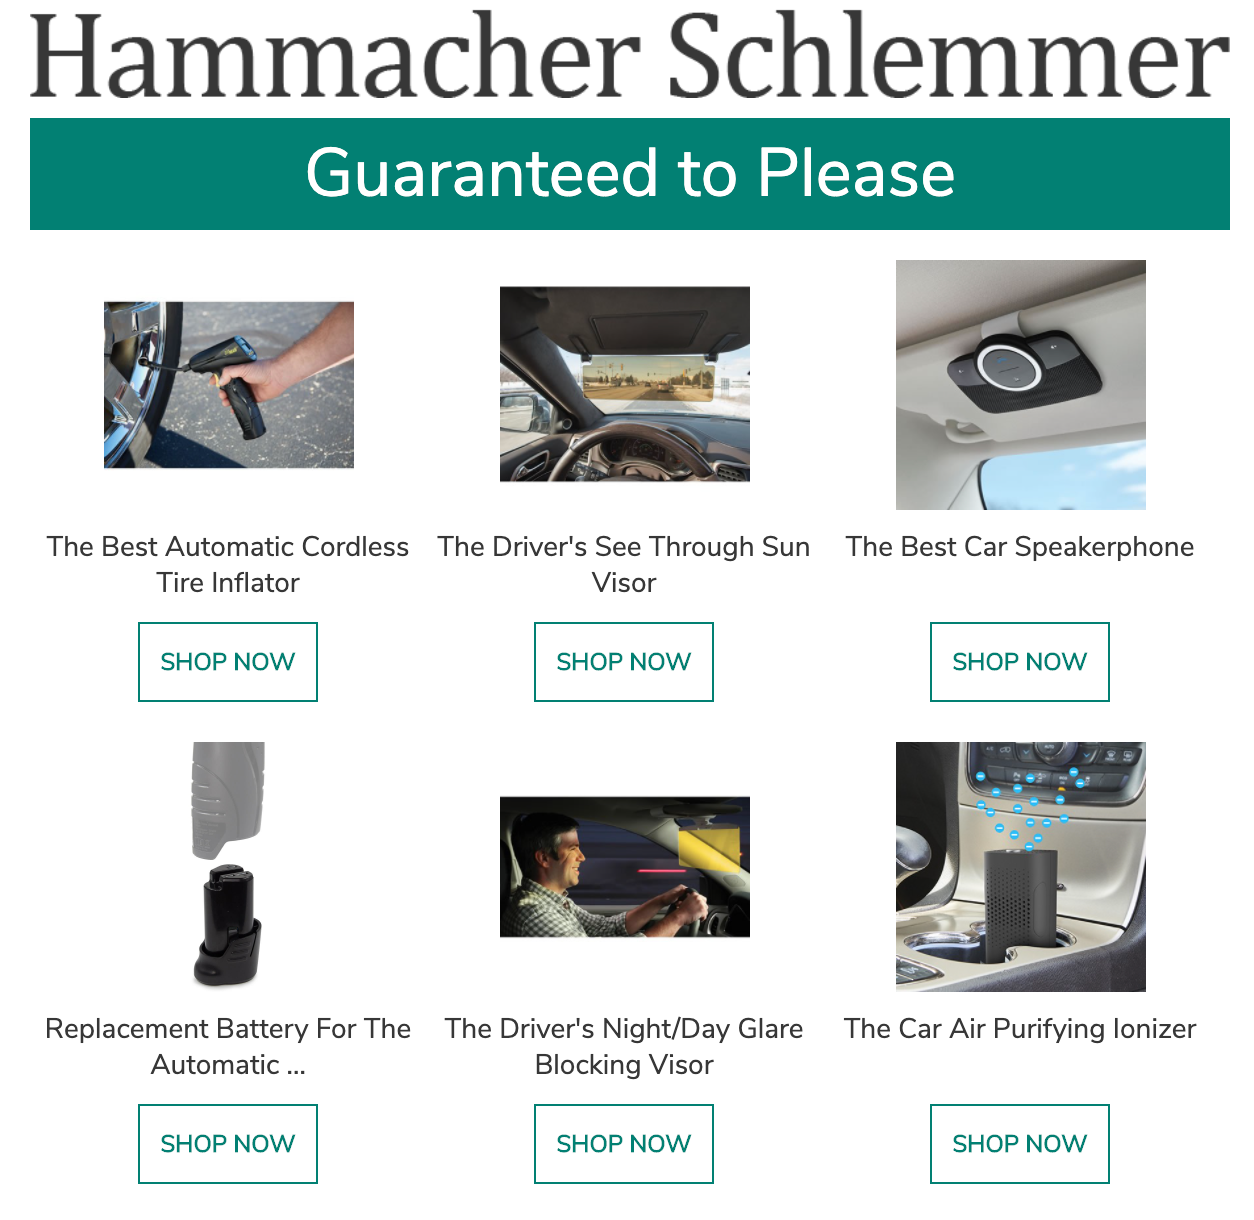 Hammacher Schlemmer personalized product recommendations for car accessories